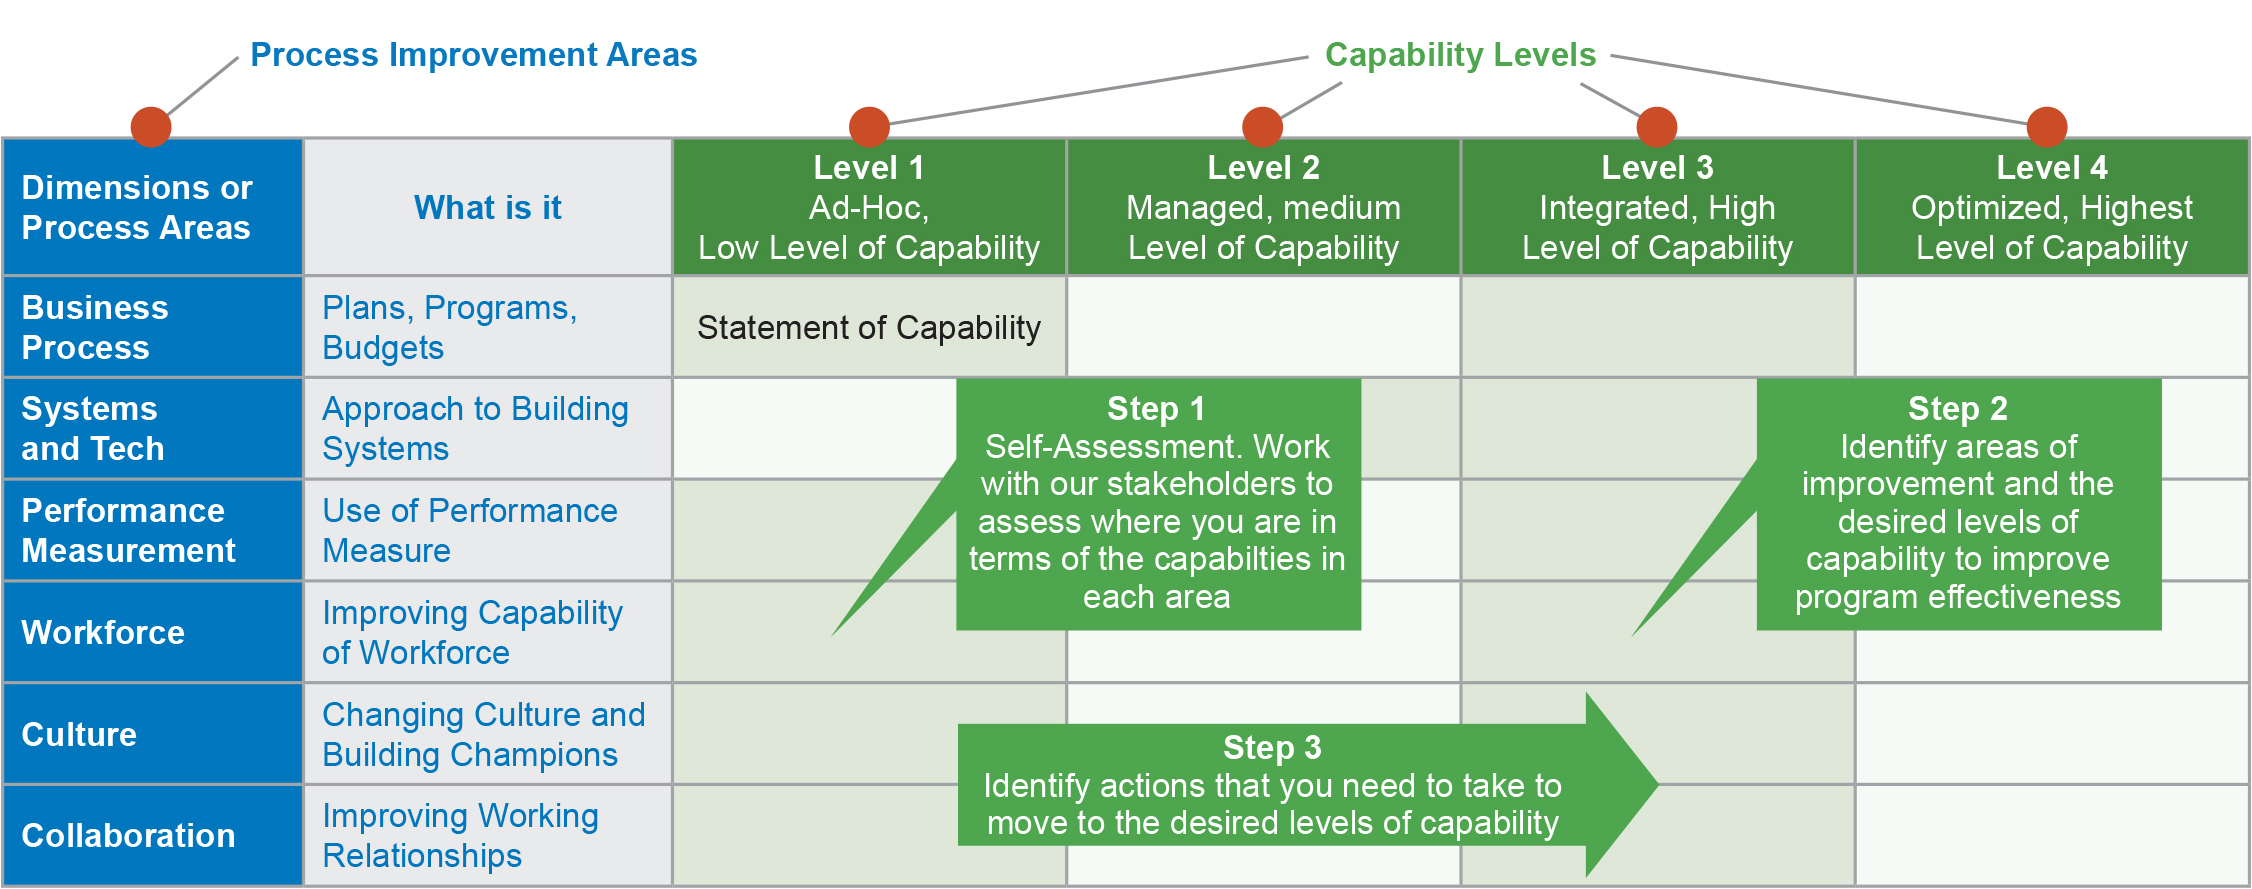 Figure illustrating each of the steps in the workzone capability maturity framework process reviews. The capability levels are: Level 1 - Ad Hoc, low level of capability; Level 2 - managed, medium level of capability; Level 3 - integrated, high level of capability; level 4 - optimized, highest level of capability.  The dimensions or process areas identified are: Business Process, Systems and Tech, Performance Management, Workforce, Culture, and Collaboration.